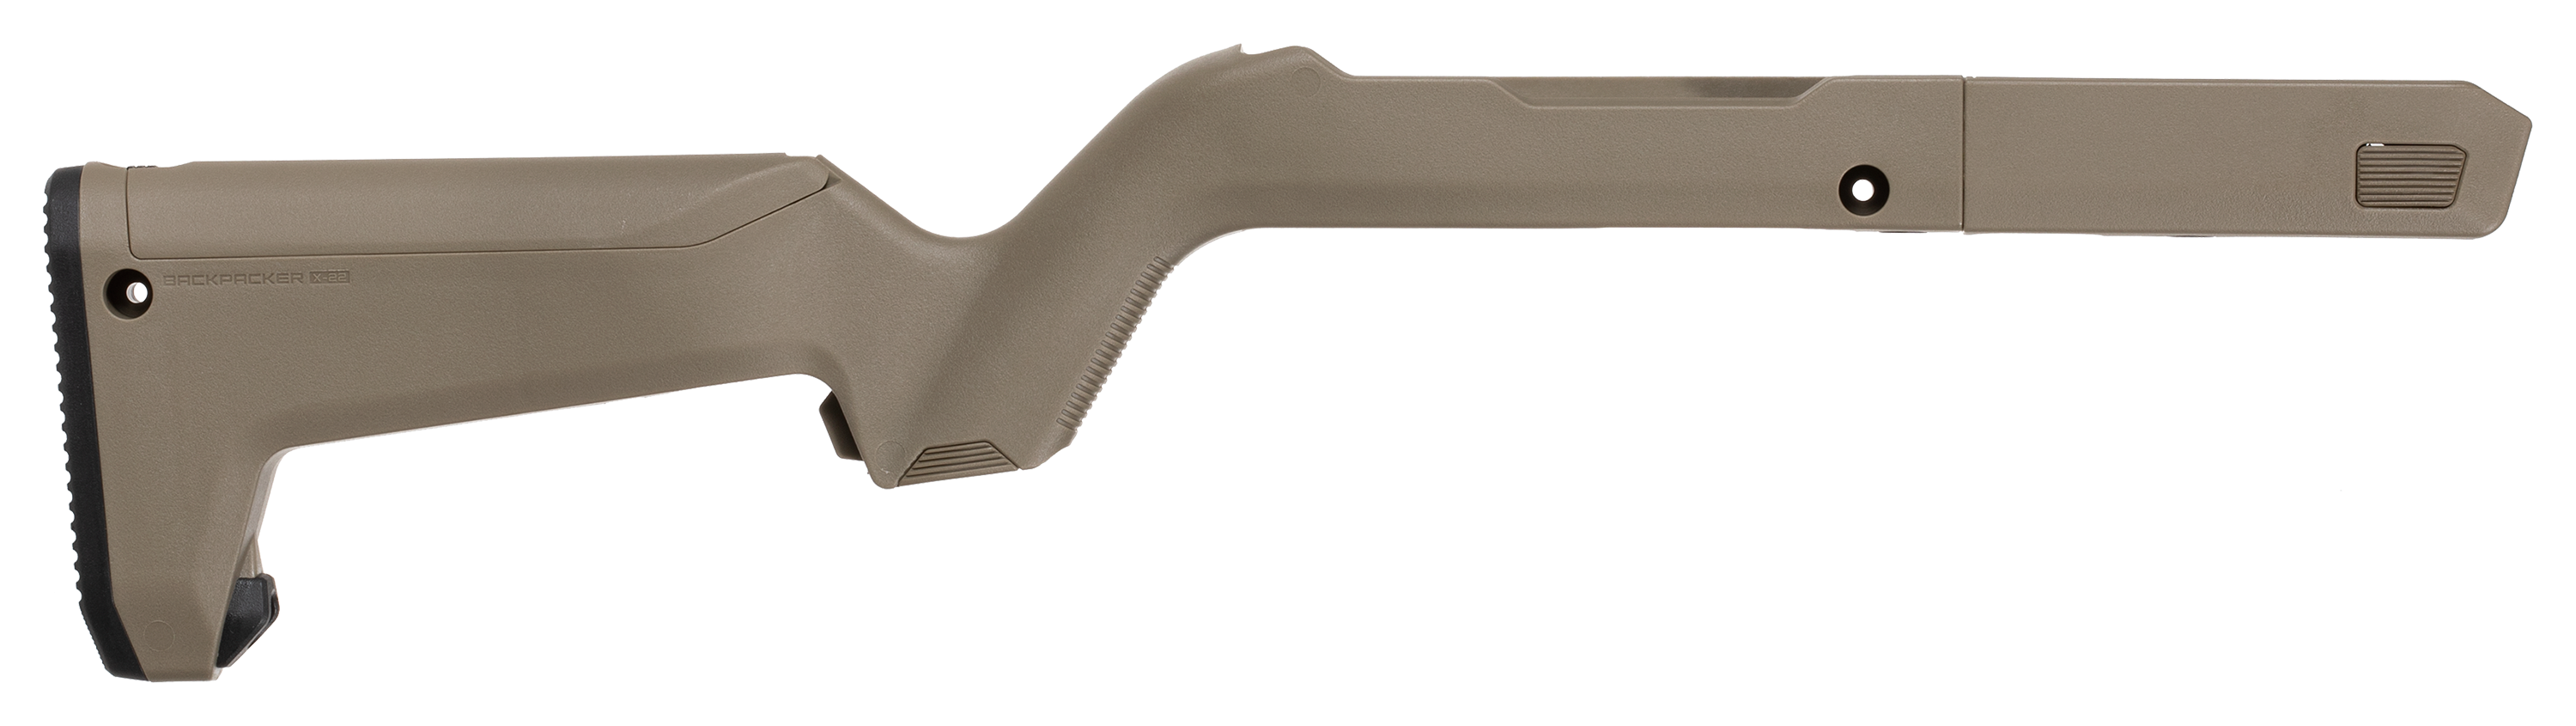 Magpul X-22 Backpacker Stock for Ruger 10/22 Takedown